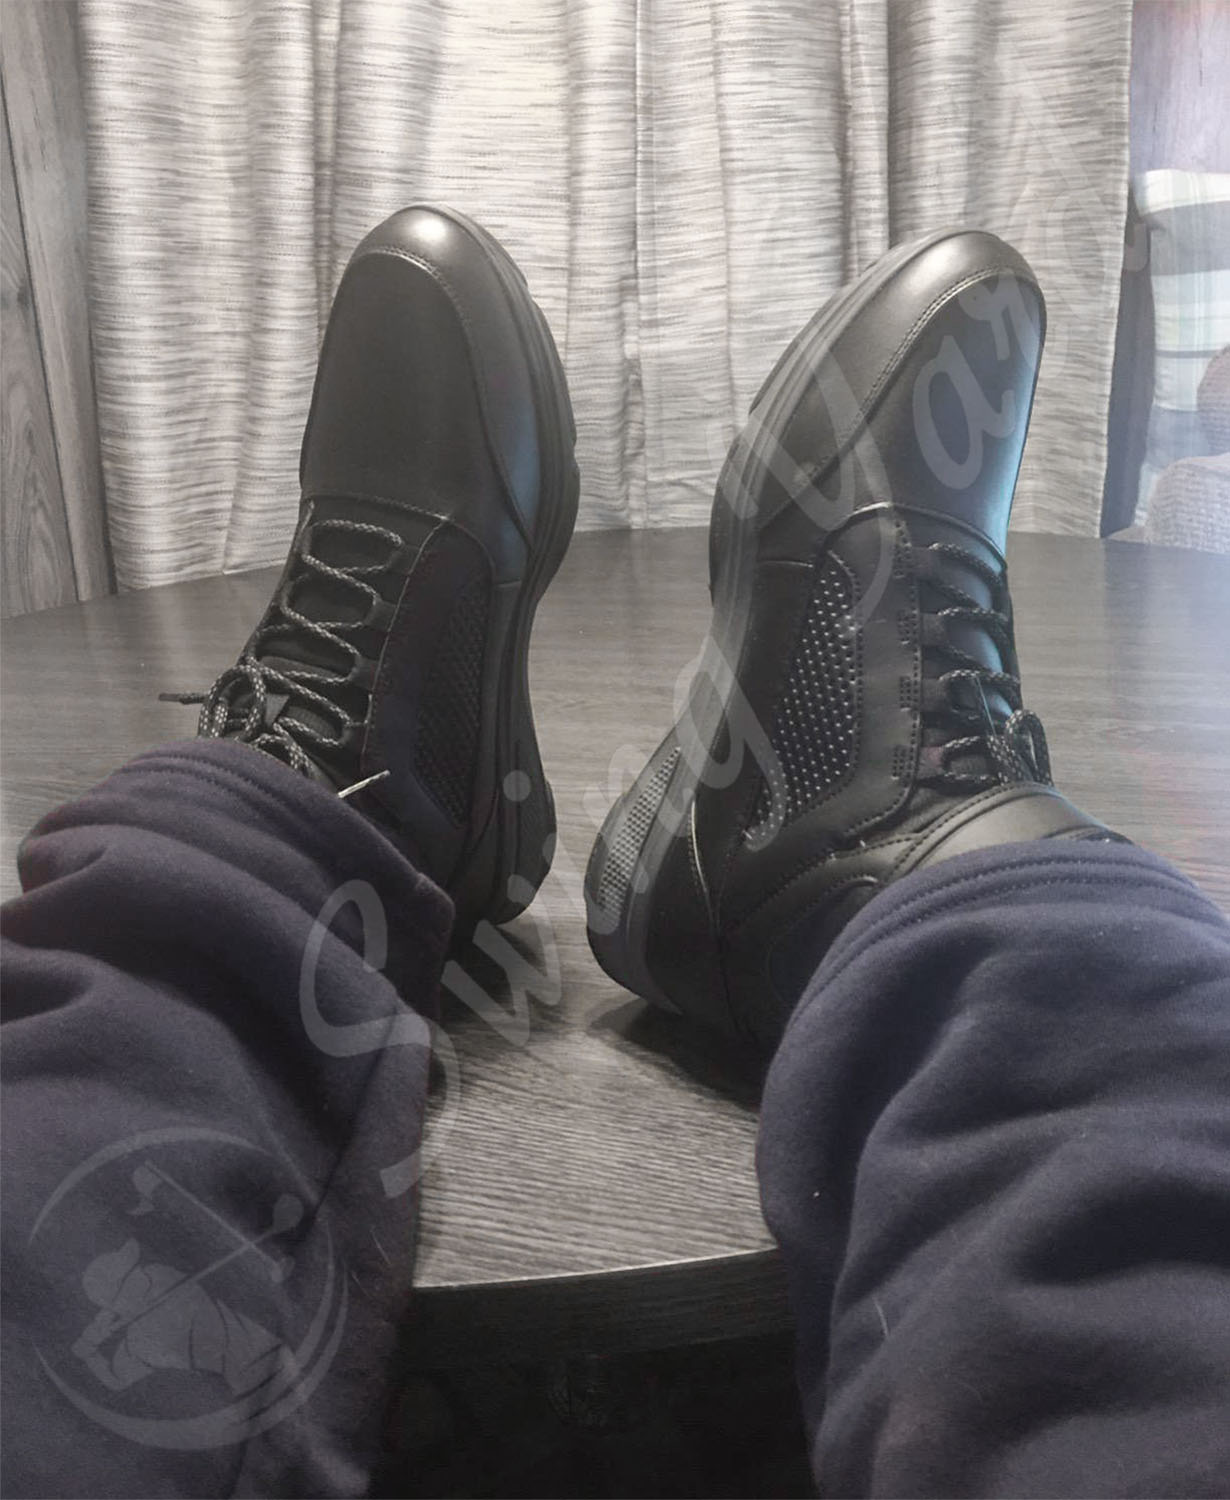 Me wearing Skechers men torque brogan relaxed fit winter golf boots at the living room